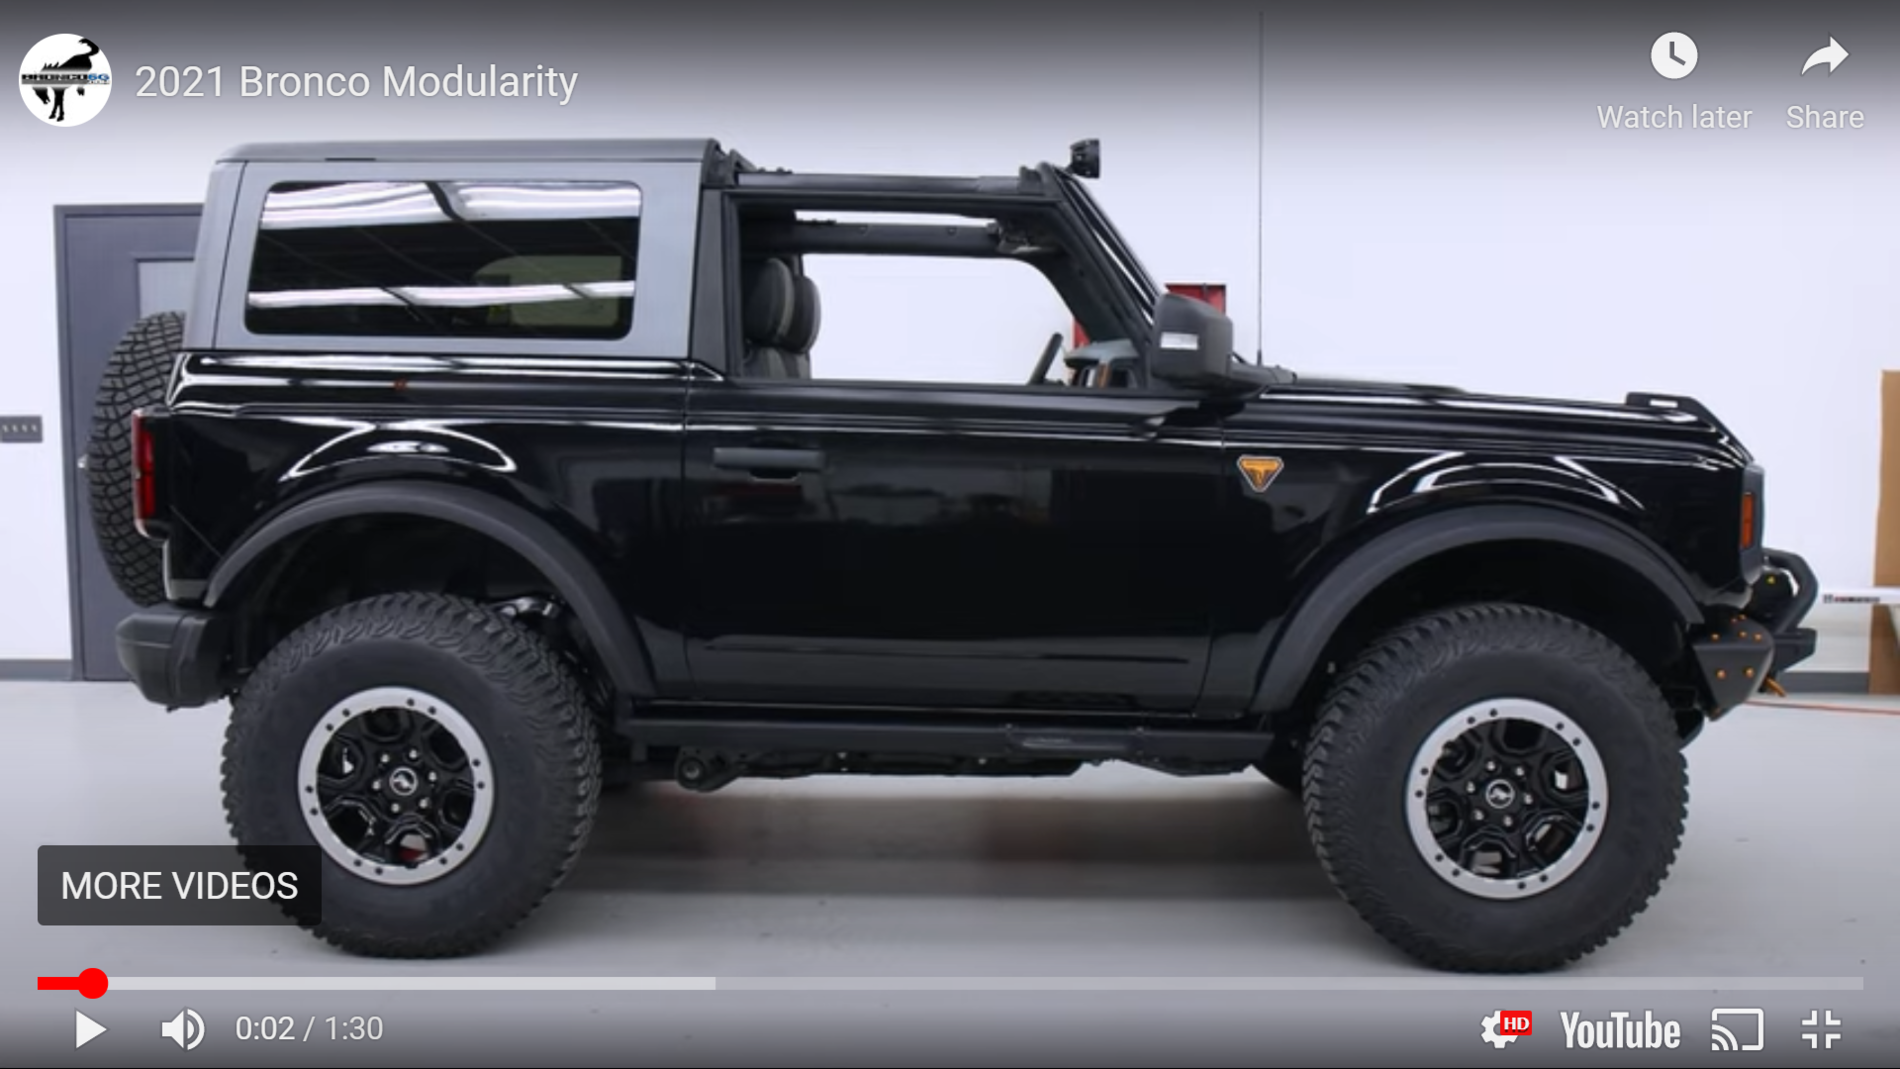 Ford Bronco How the Bronco's Modular Platform Allows for Easy Customization and Modifications 1614828162448